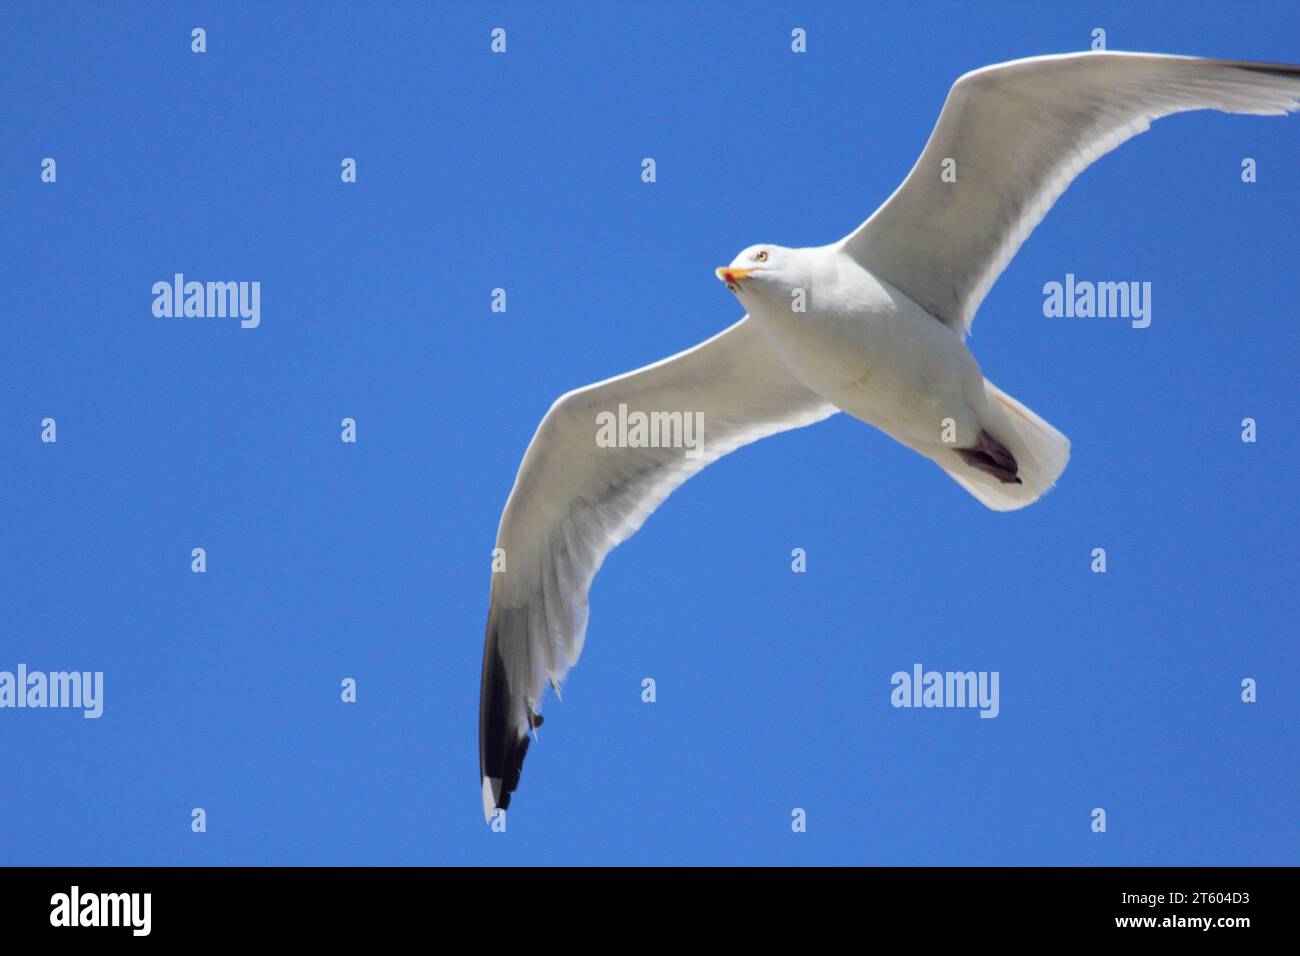 Close-up of a flying gull, with blue sky in the background Stock Photo